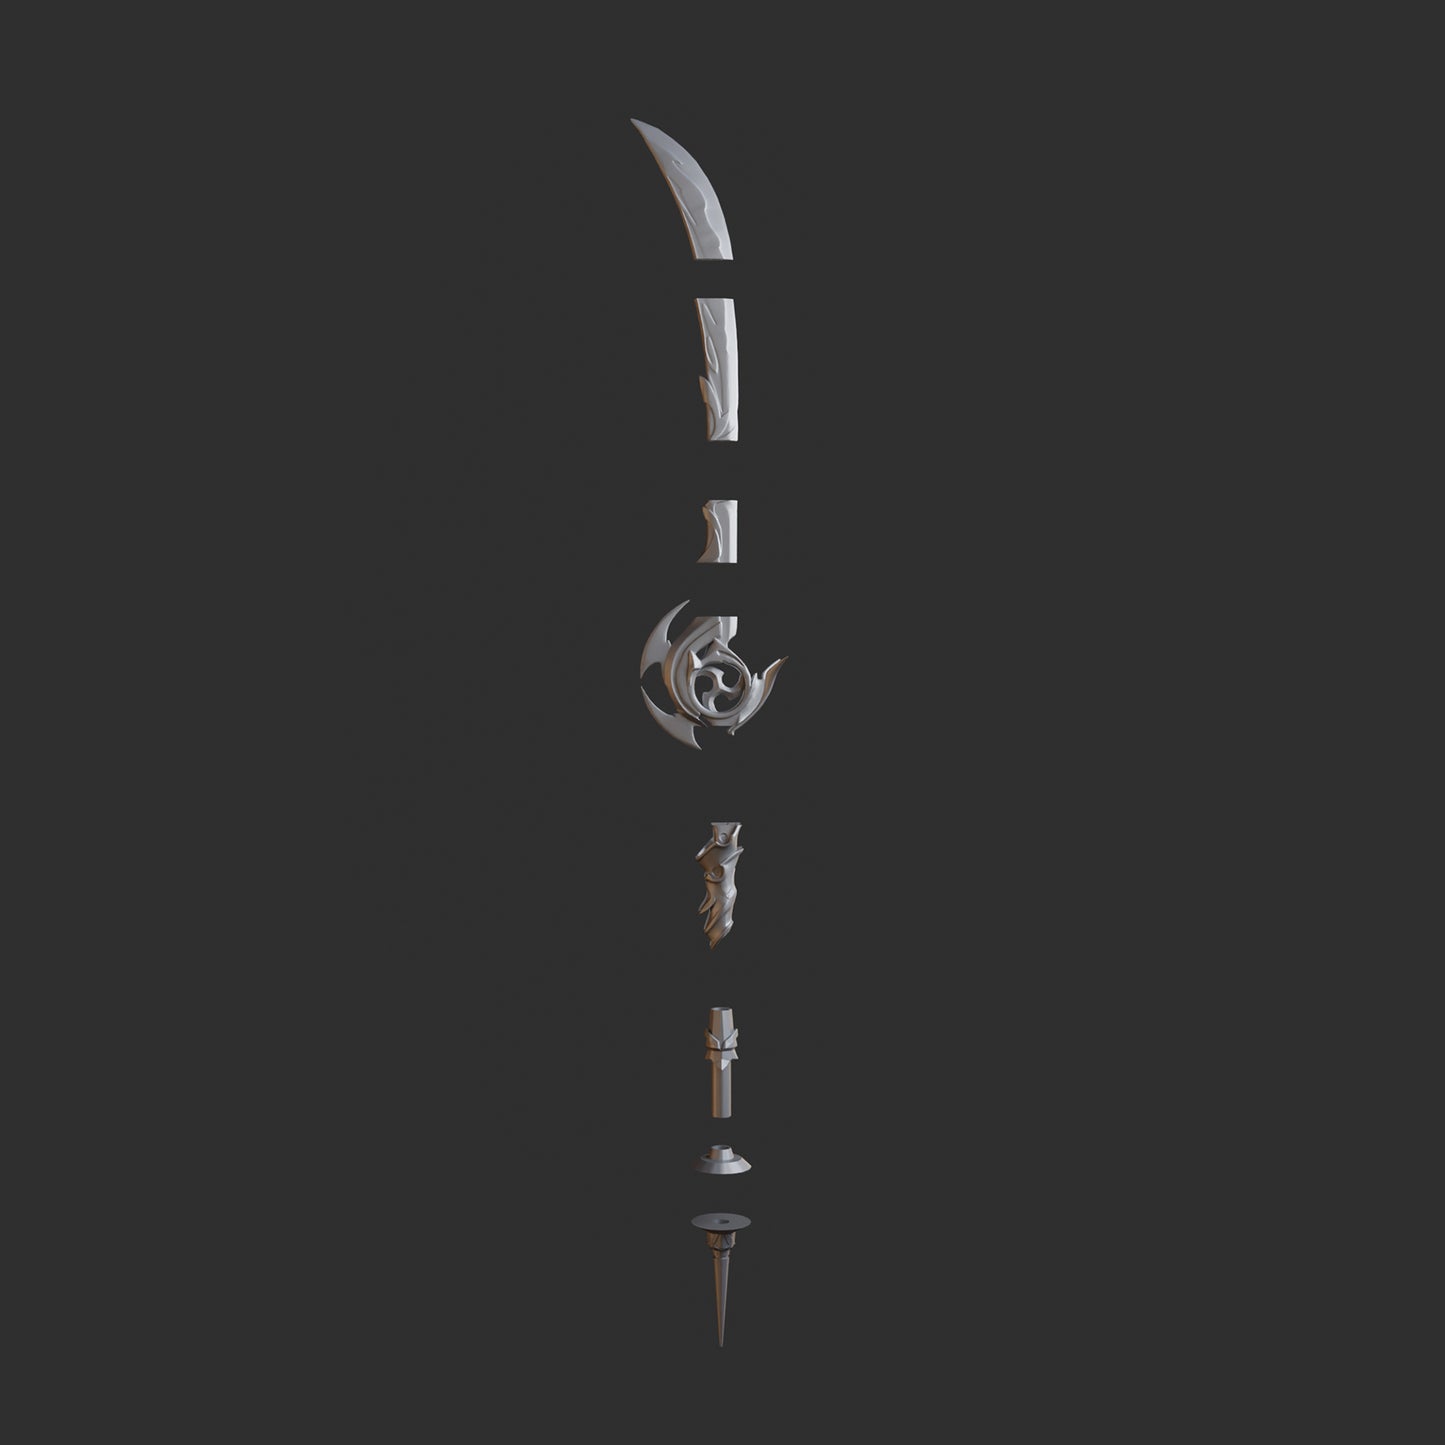 Baal's Spear Engulfing Lightning - Digital 3D Model Files and Physical 3D Printed Kit Options - Baal Cosplay - Baal Spear